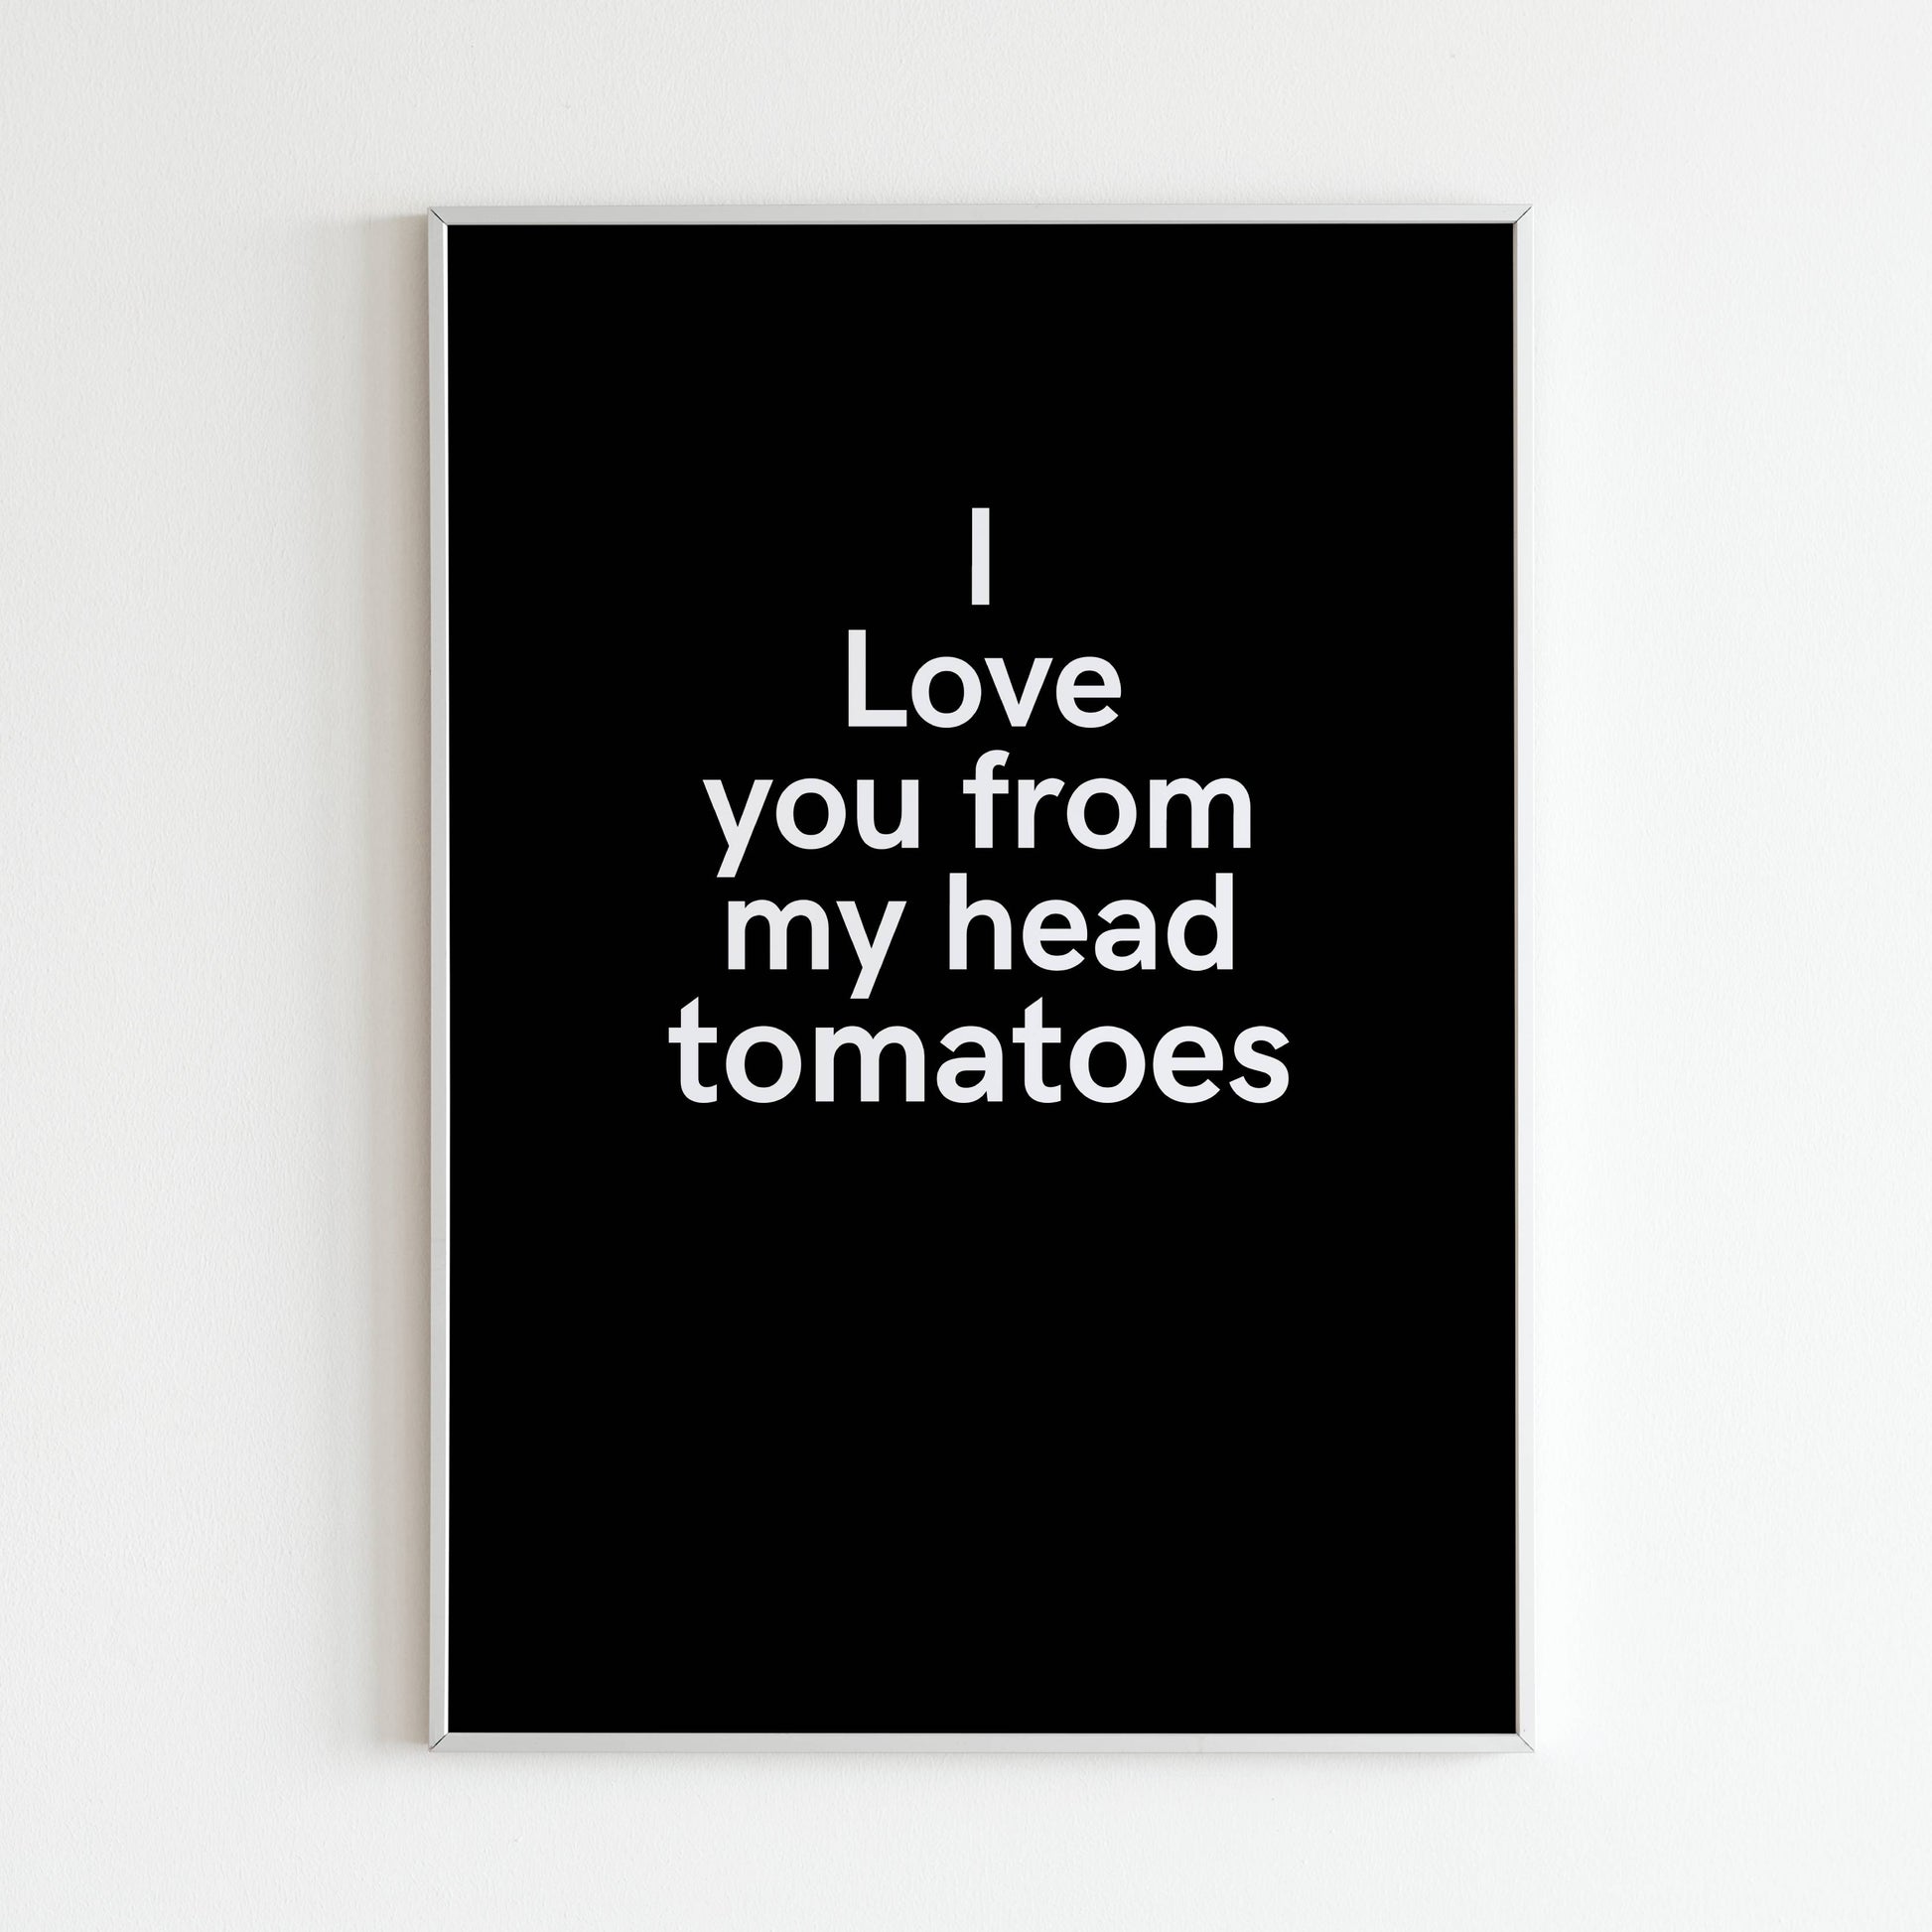 Downloadable "I love you from head tomatoes" art print, add a touch of silliness to your love declaration.